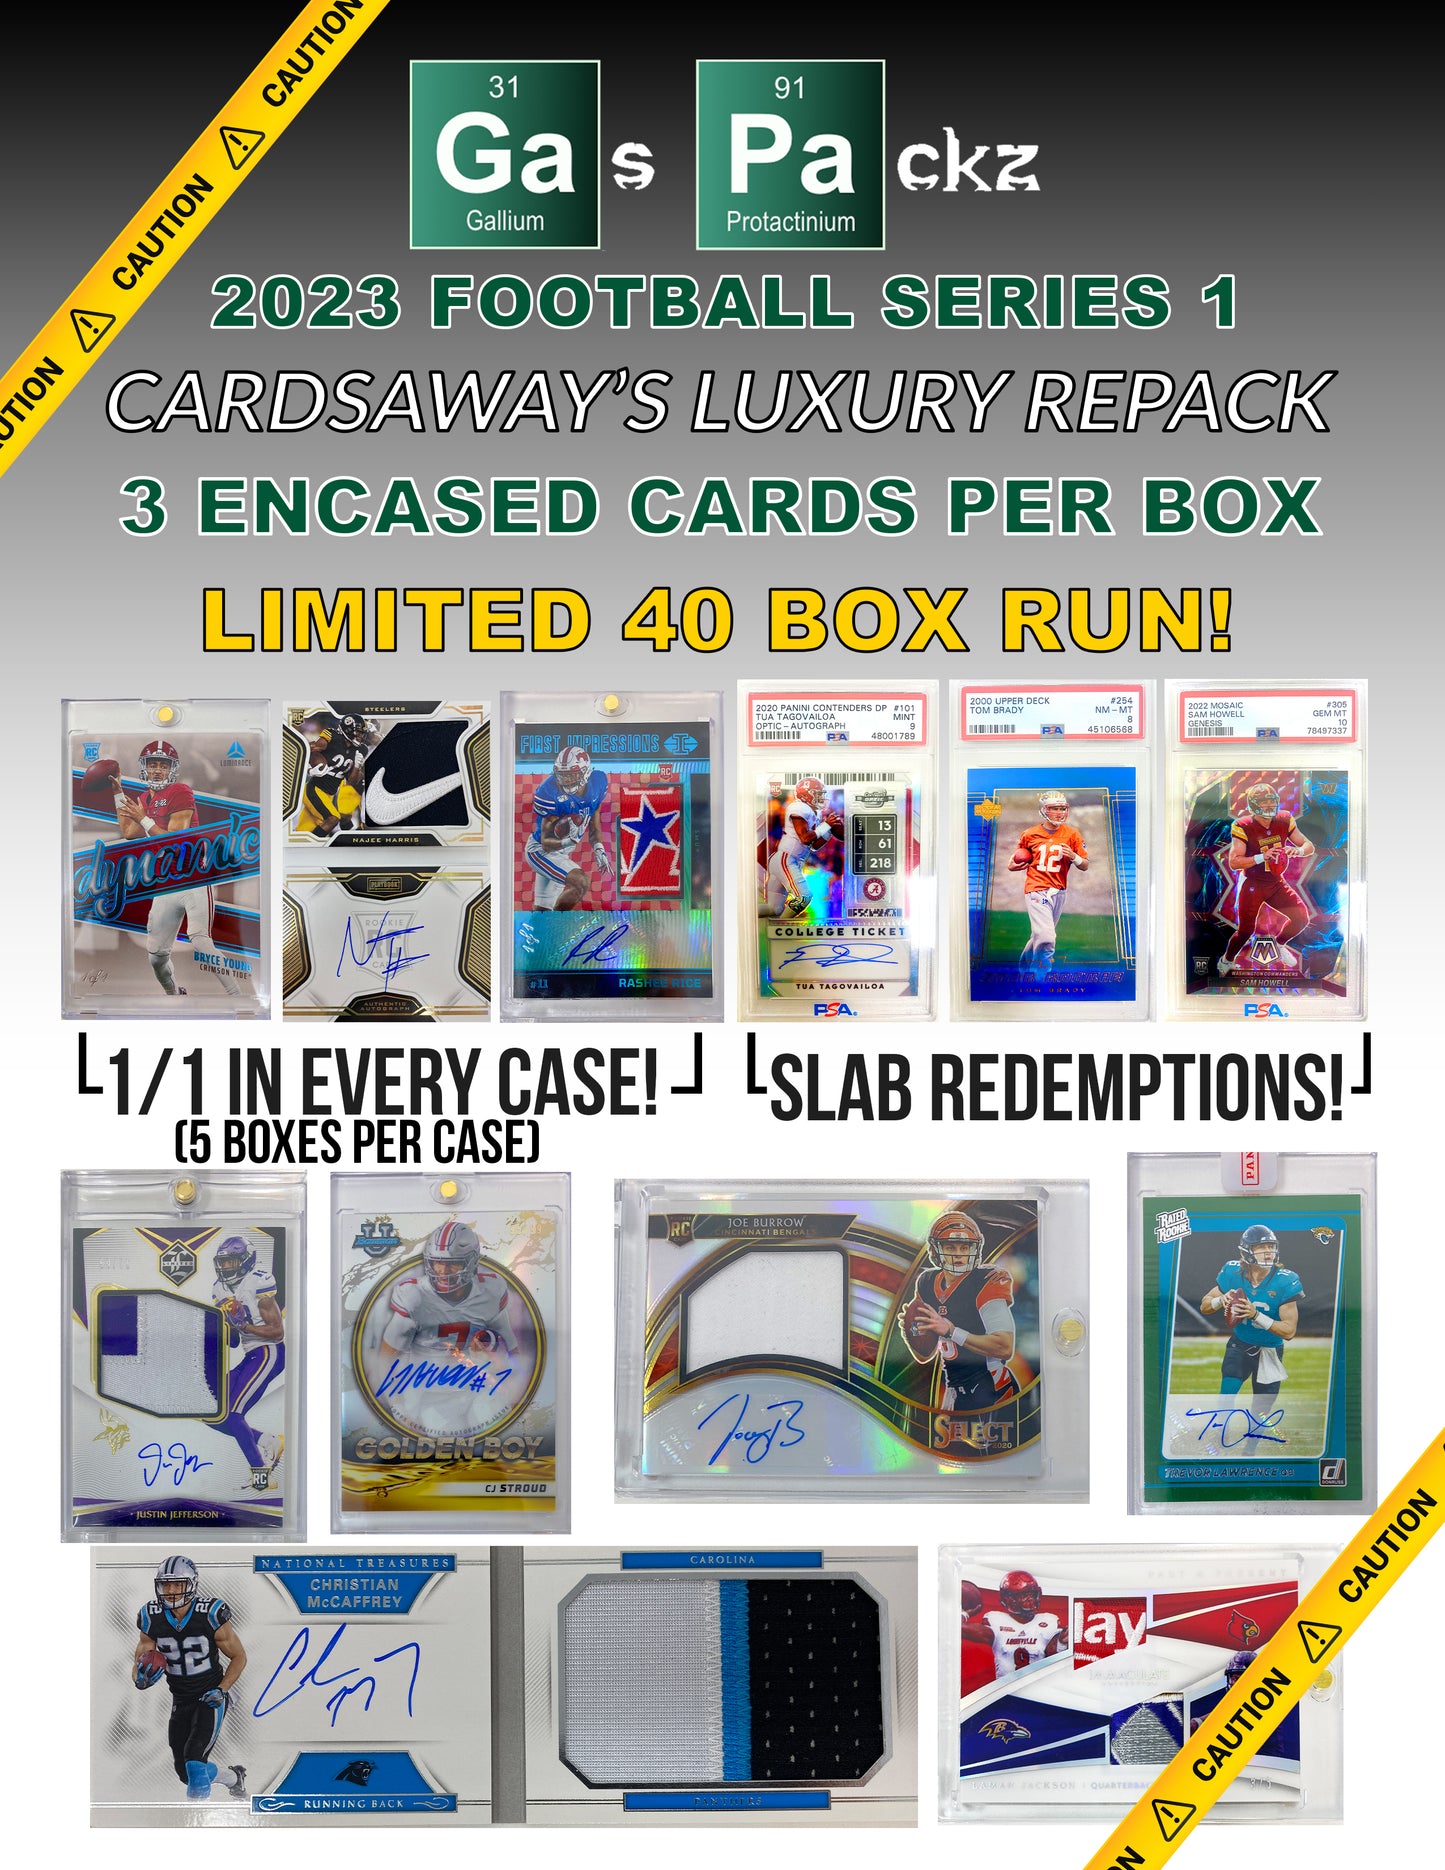 2023 GAS PACKZ FOOTBALL SERIES 1 - SOLD OUT IN 4 DAYS!